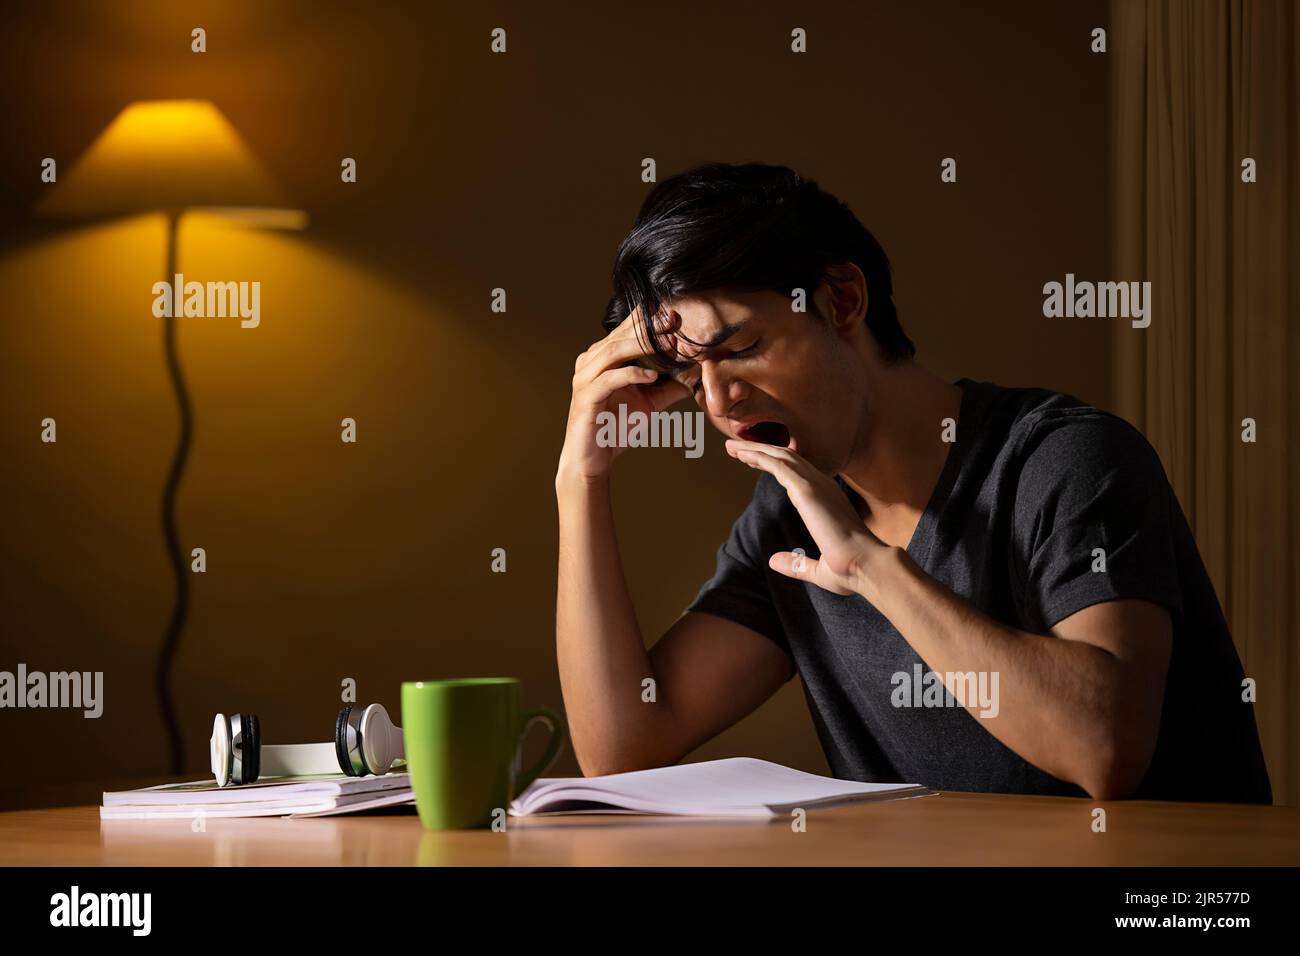 Portrait of an exhausted teenager yawning while studying at home Stock Photo